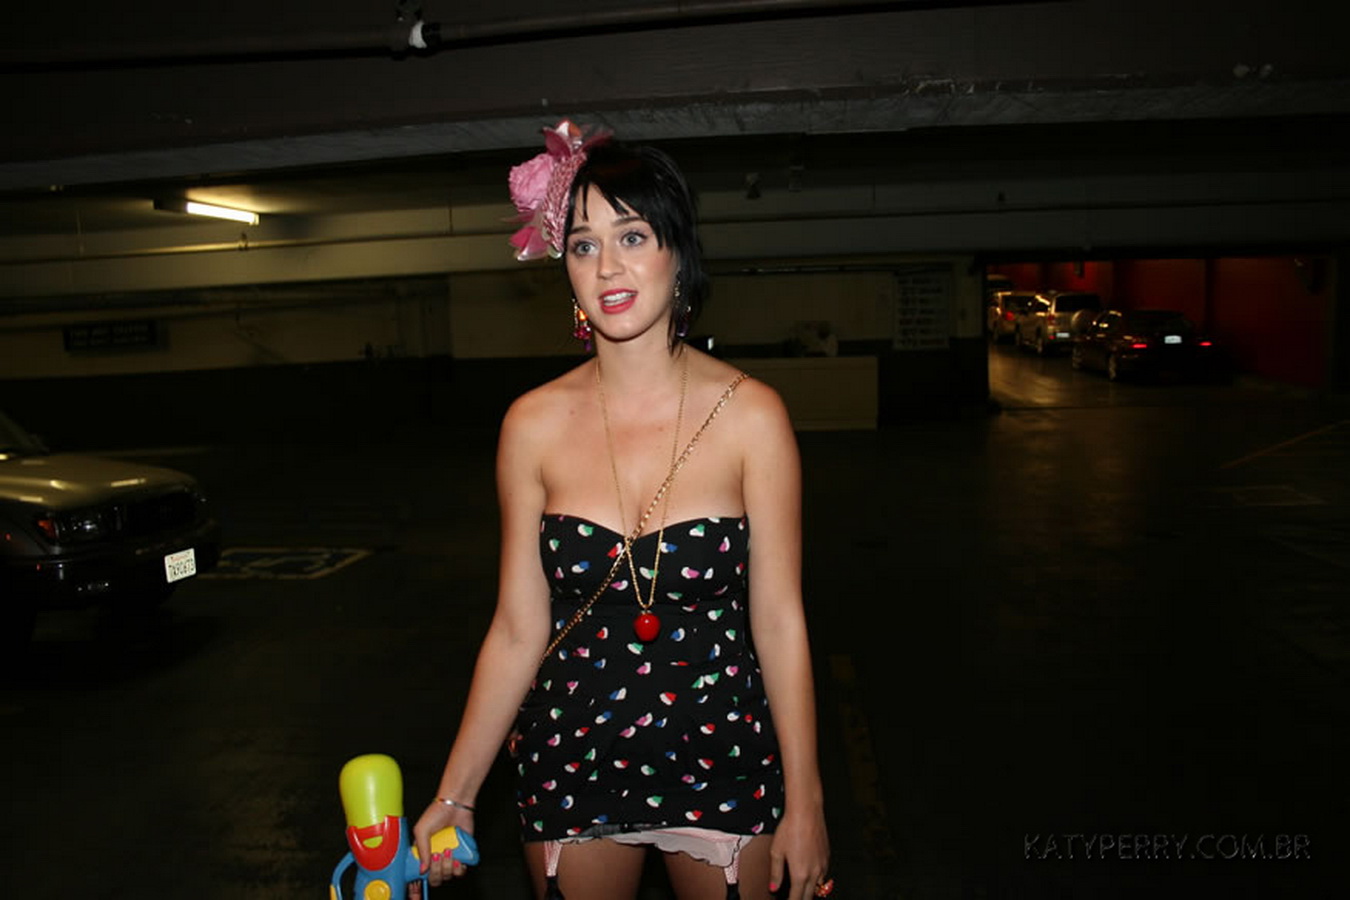 Katy_Perry_bobsslip_drunk_cleavage_downblouse_upskirt_nipslip_at_her_birthday_2007_party_99x_HQ_22.jpg